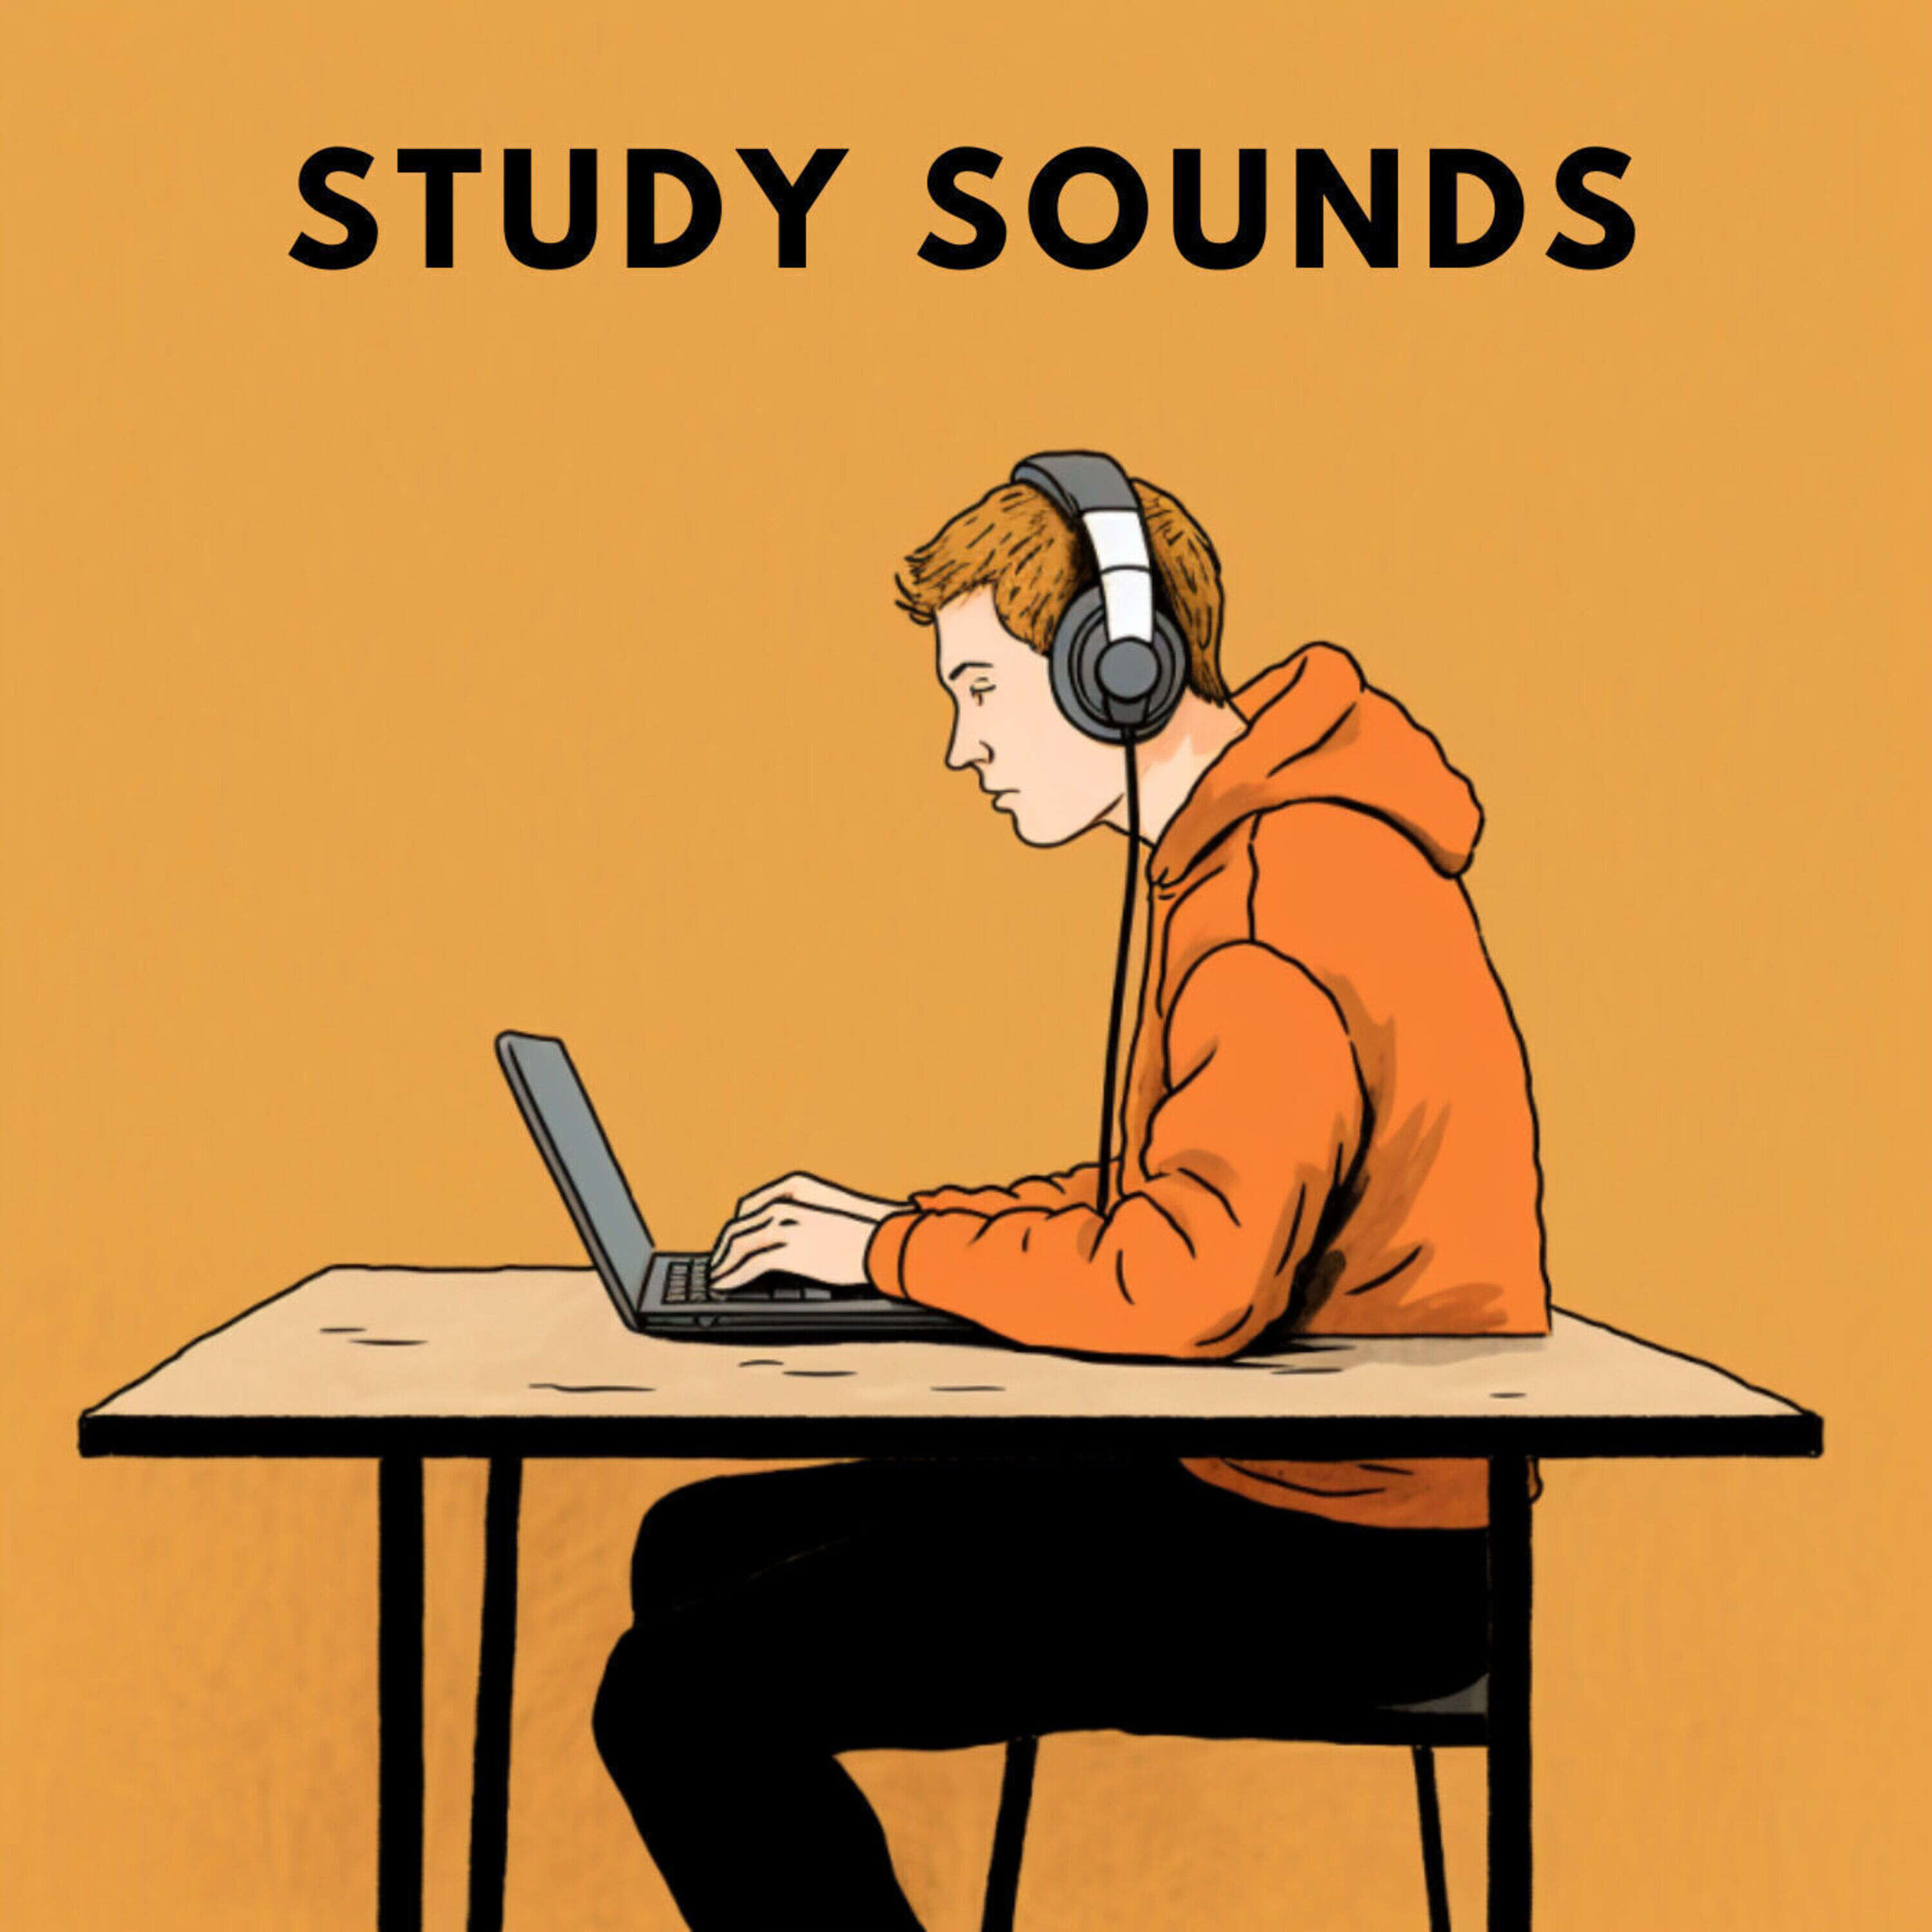 Study sounds from Success Integrated (sounds for study, relaxing sounds, studying sounds)